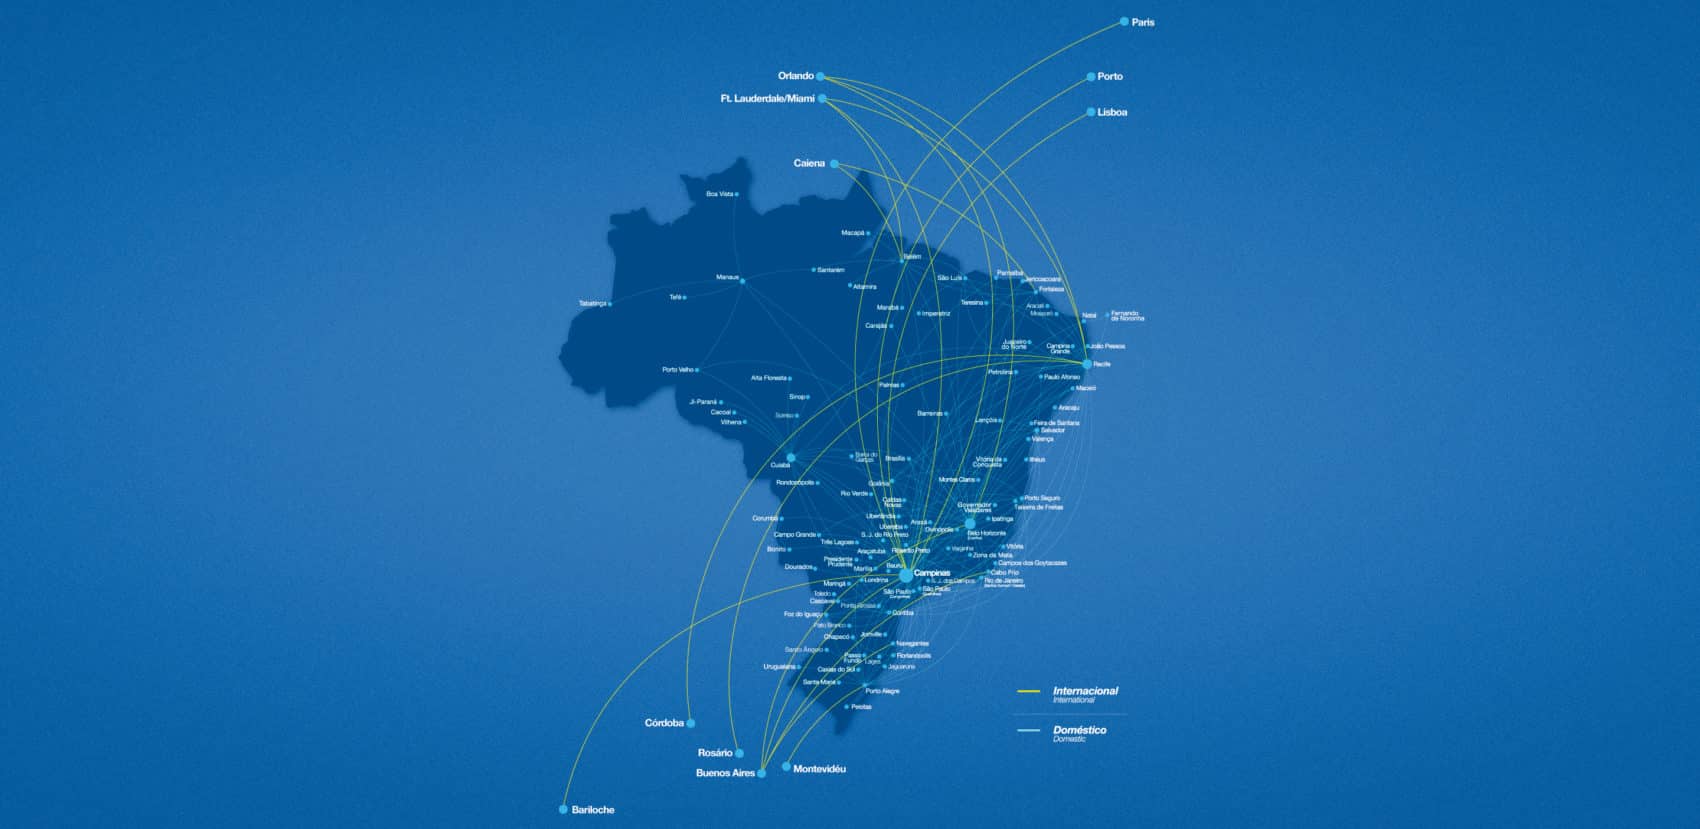 Azul Airlines starts new direct flight from New York to Brazil in June 2020